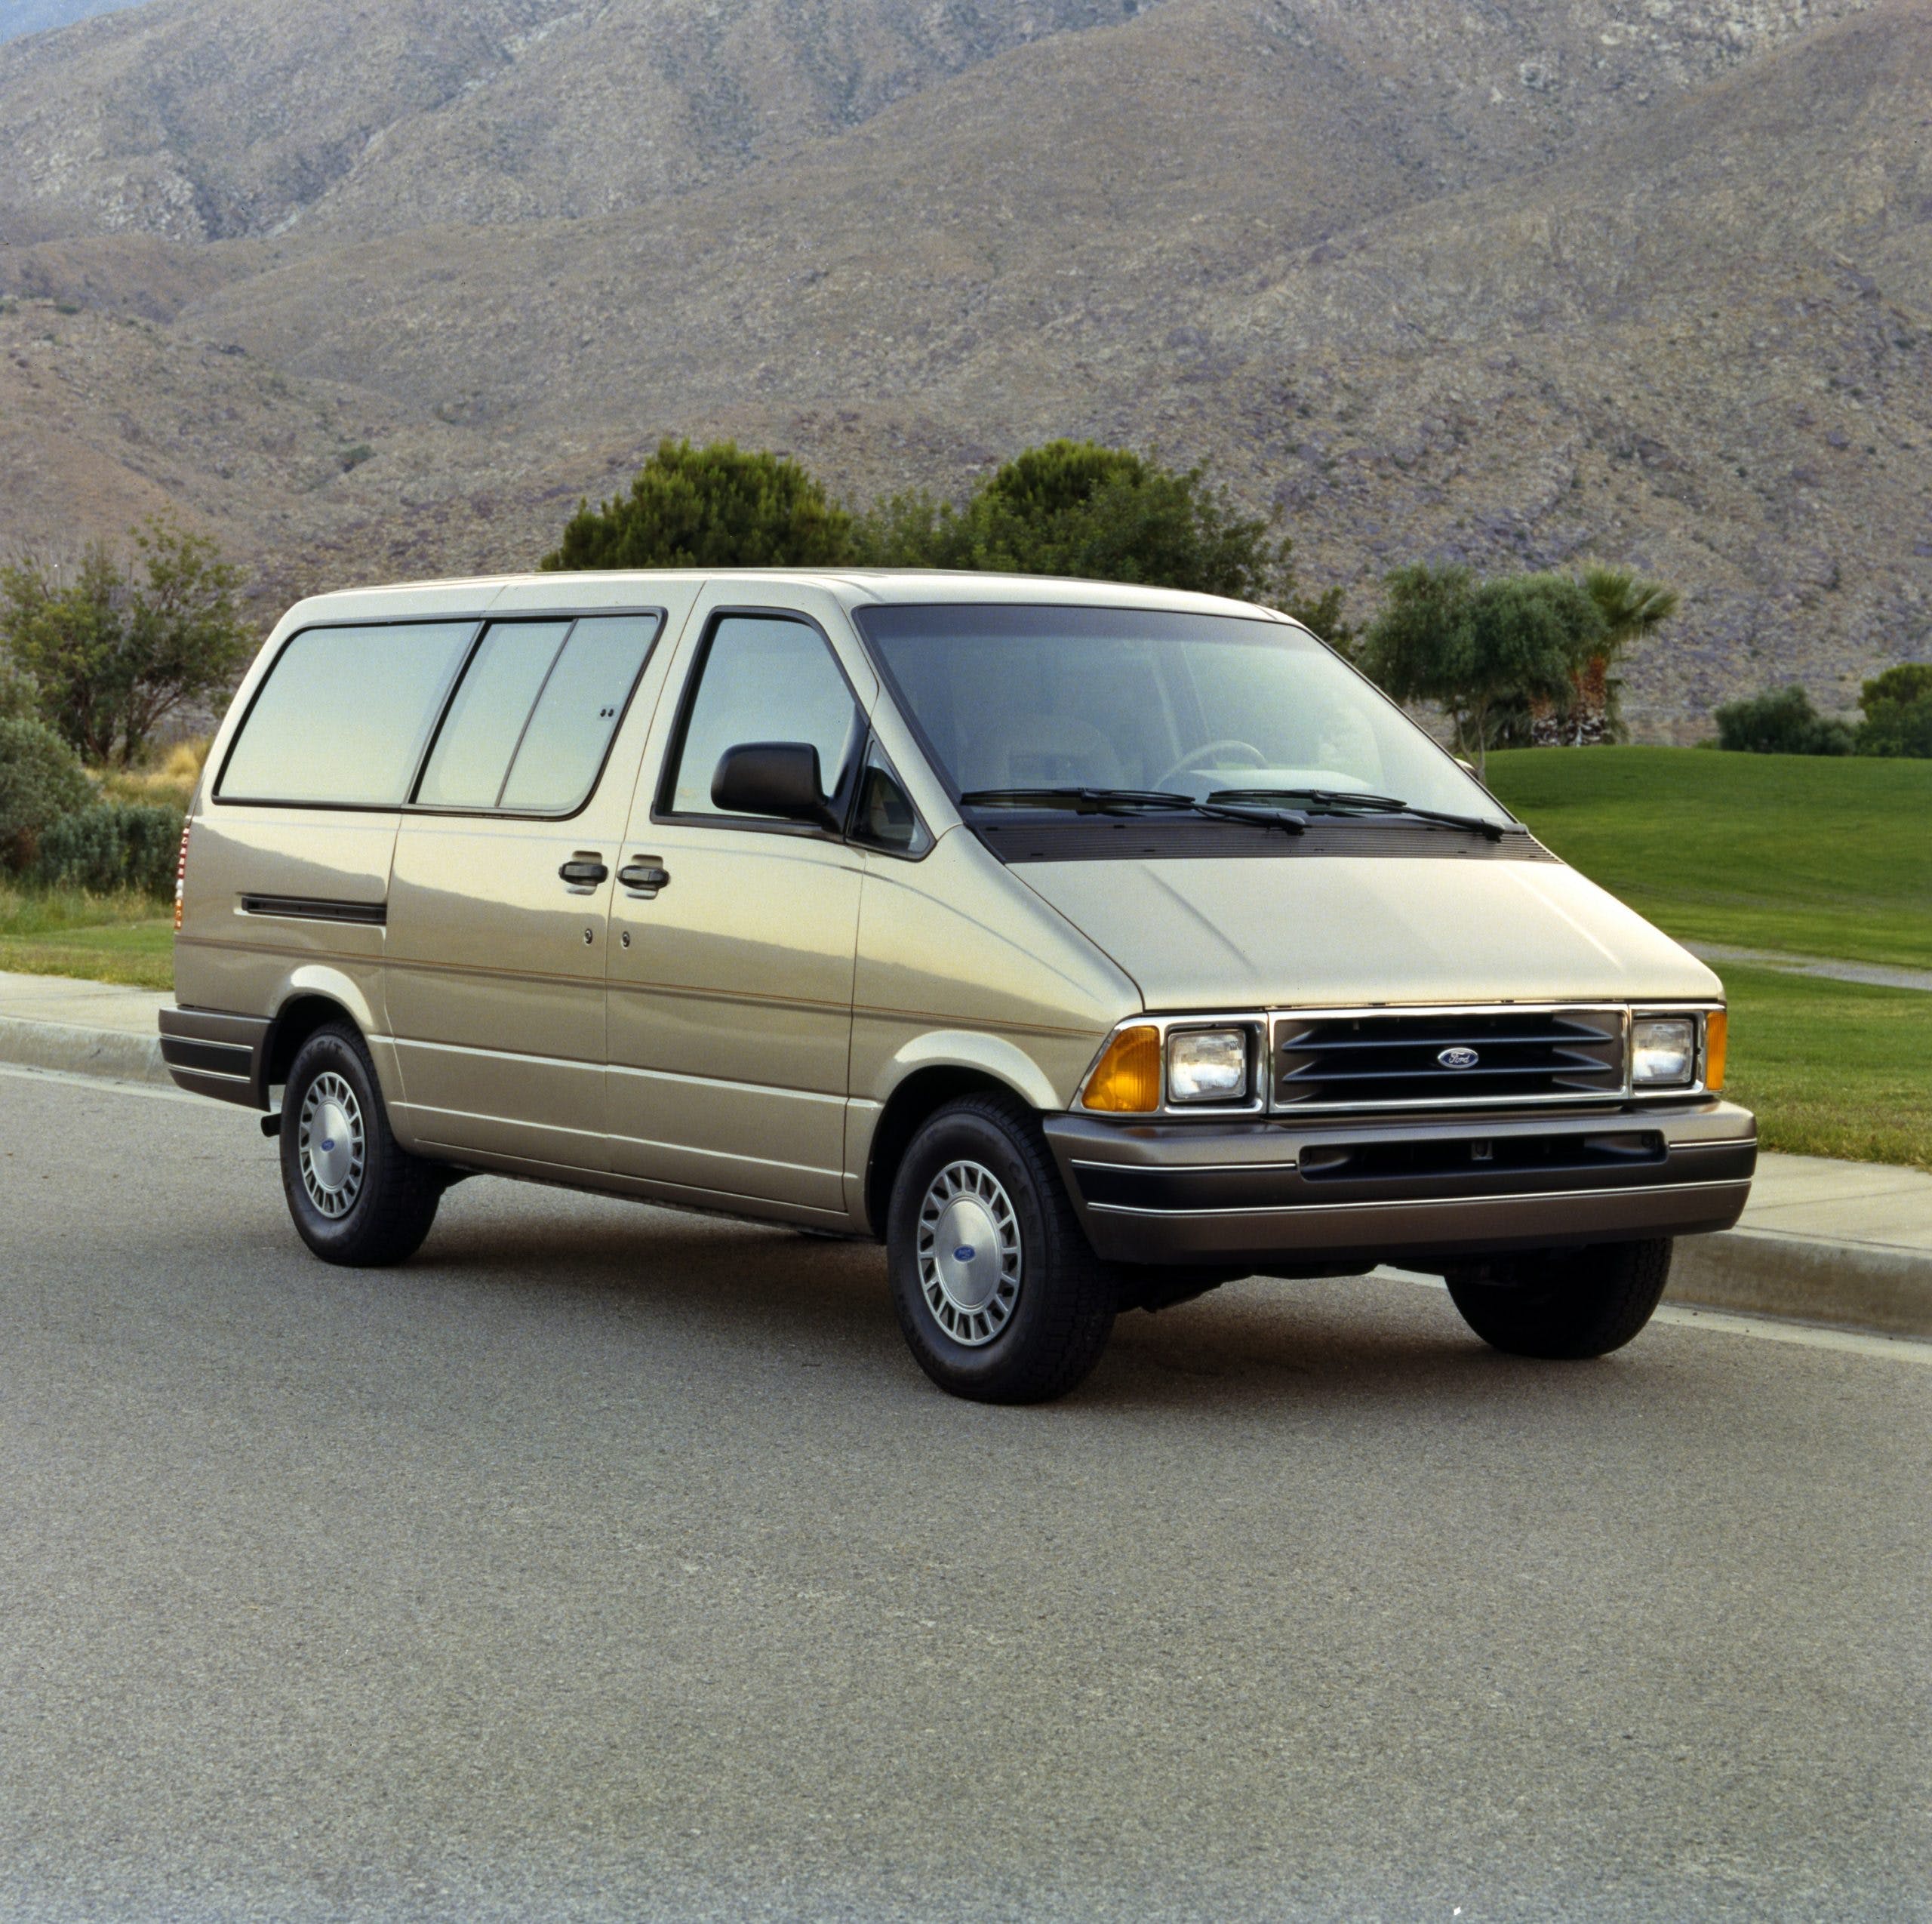 The Ford Aerostar, overshadowed by Chrysler's minivans, has faded into  undeserving obscurity - Hagerty Media